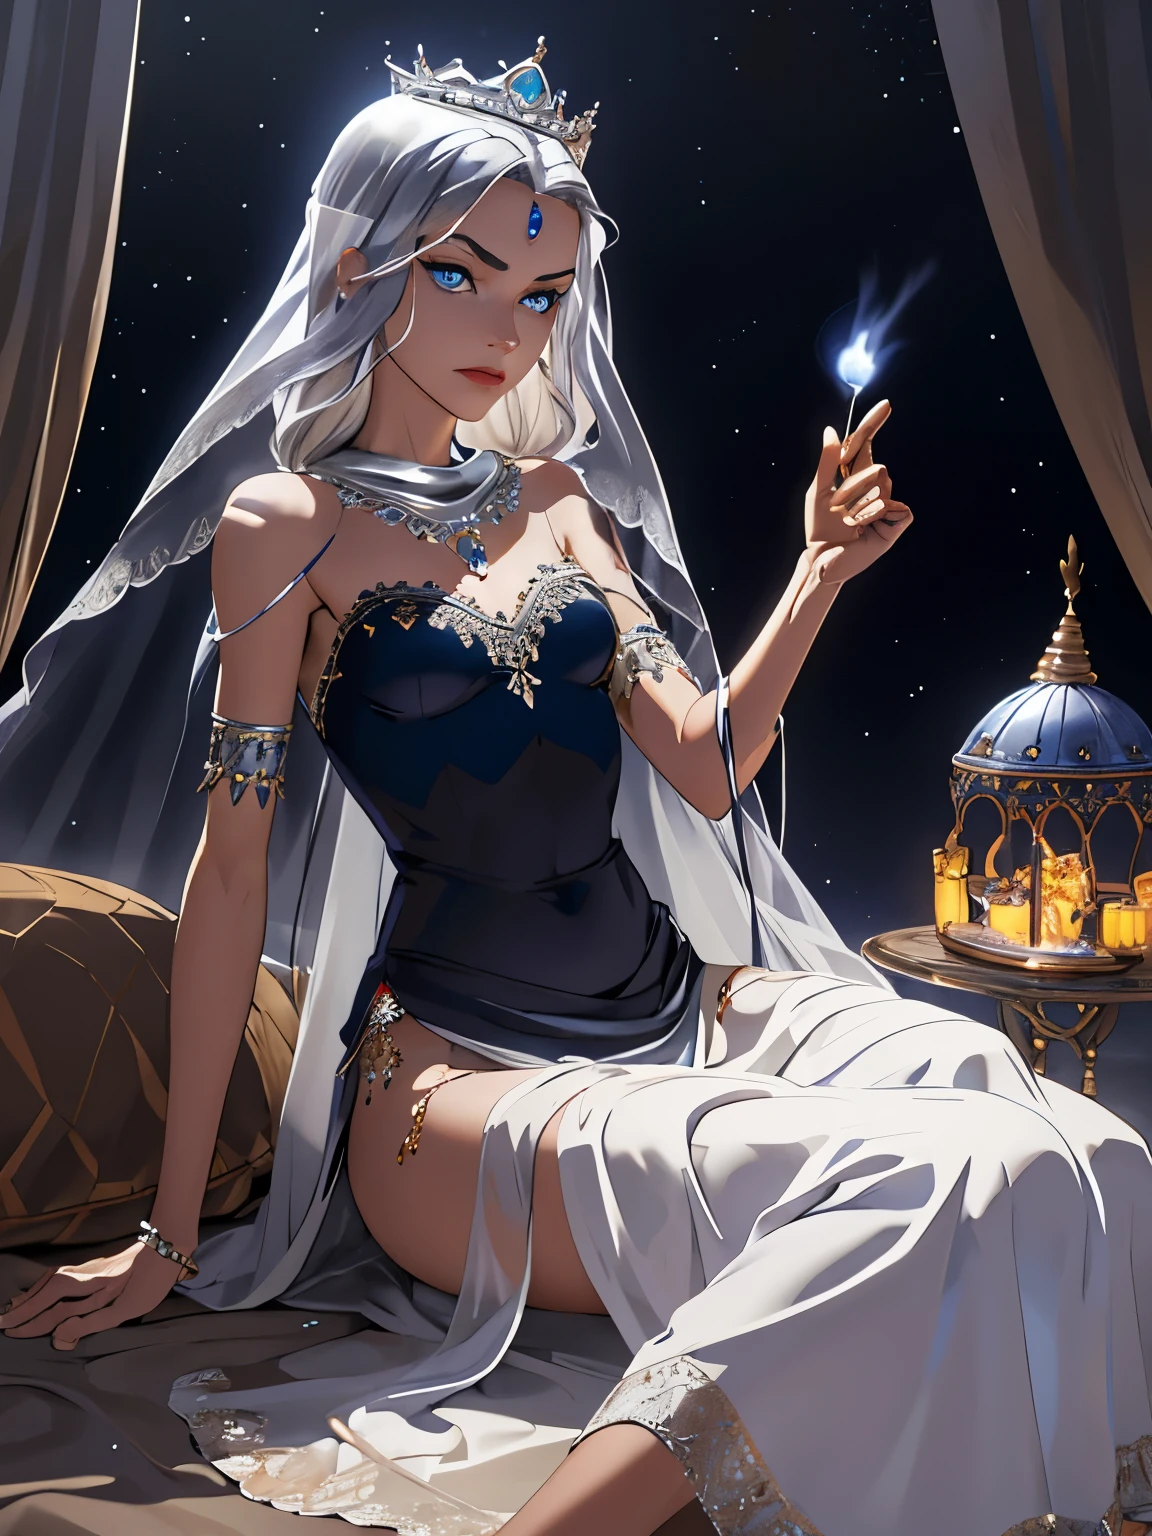 Adult odalisque with silver hair and blue eyes, expensive dress, mean look, silver, jewelry, small breasts, desert, camp, gypsy, nomadic, brave face, brave, small, thin, mystical, incense, tent, moonlight, silver moonlight, lighting, lace, transparent, long skirt, veil, crown,